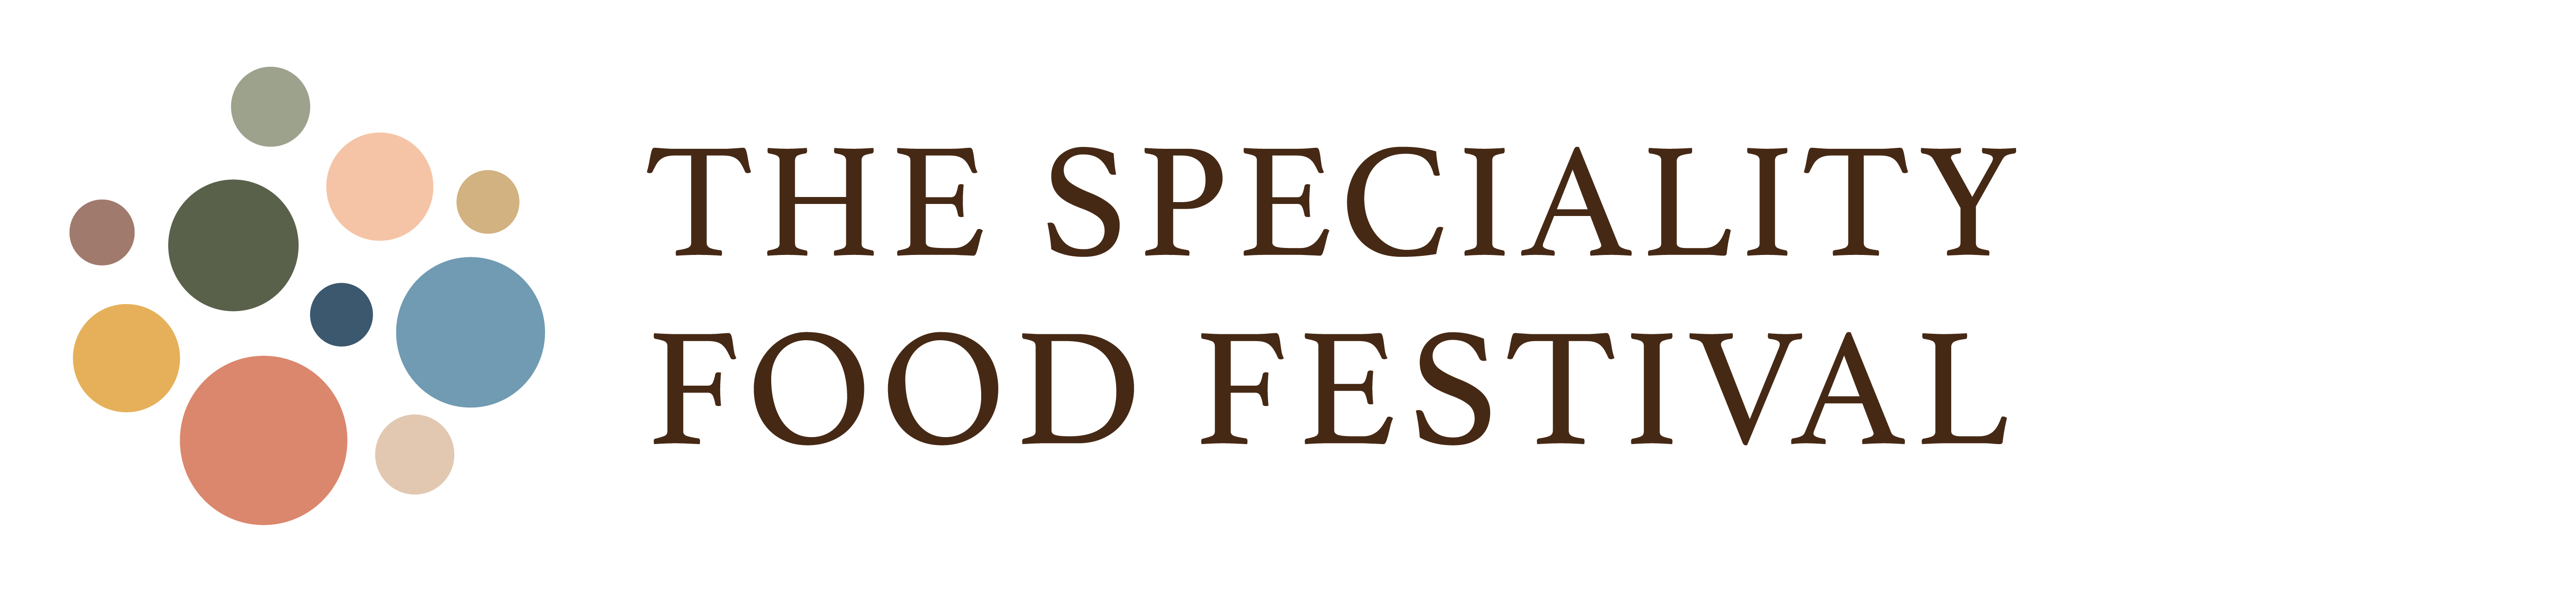 The Speciality Food Festival: Fine Foods and Gourmet